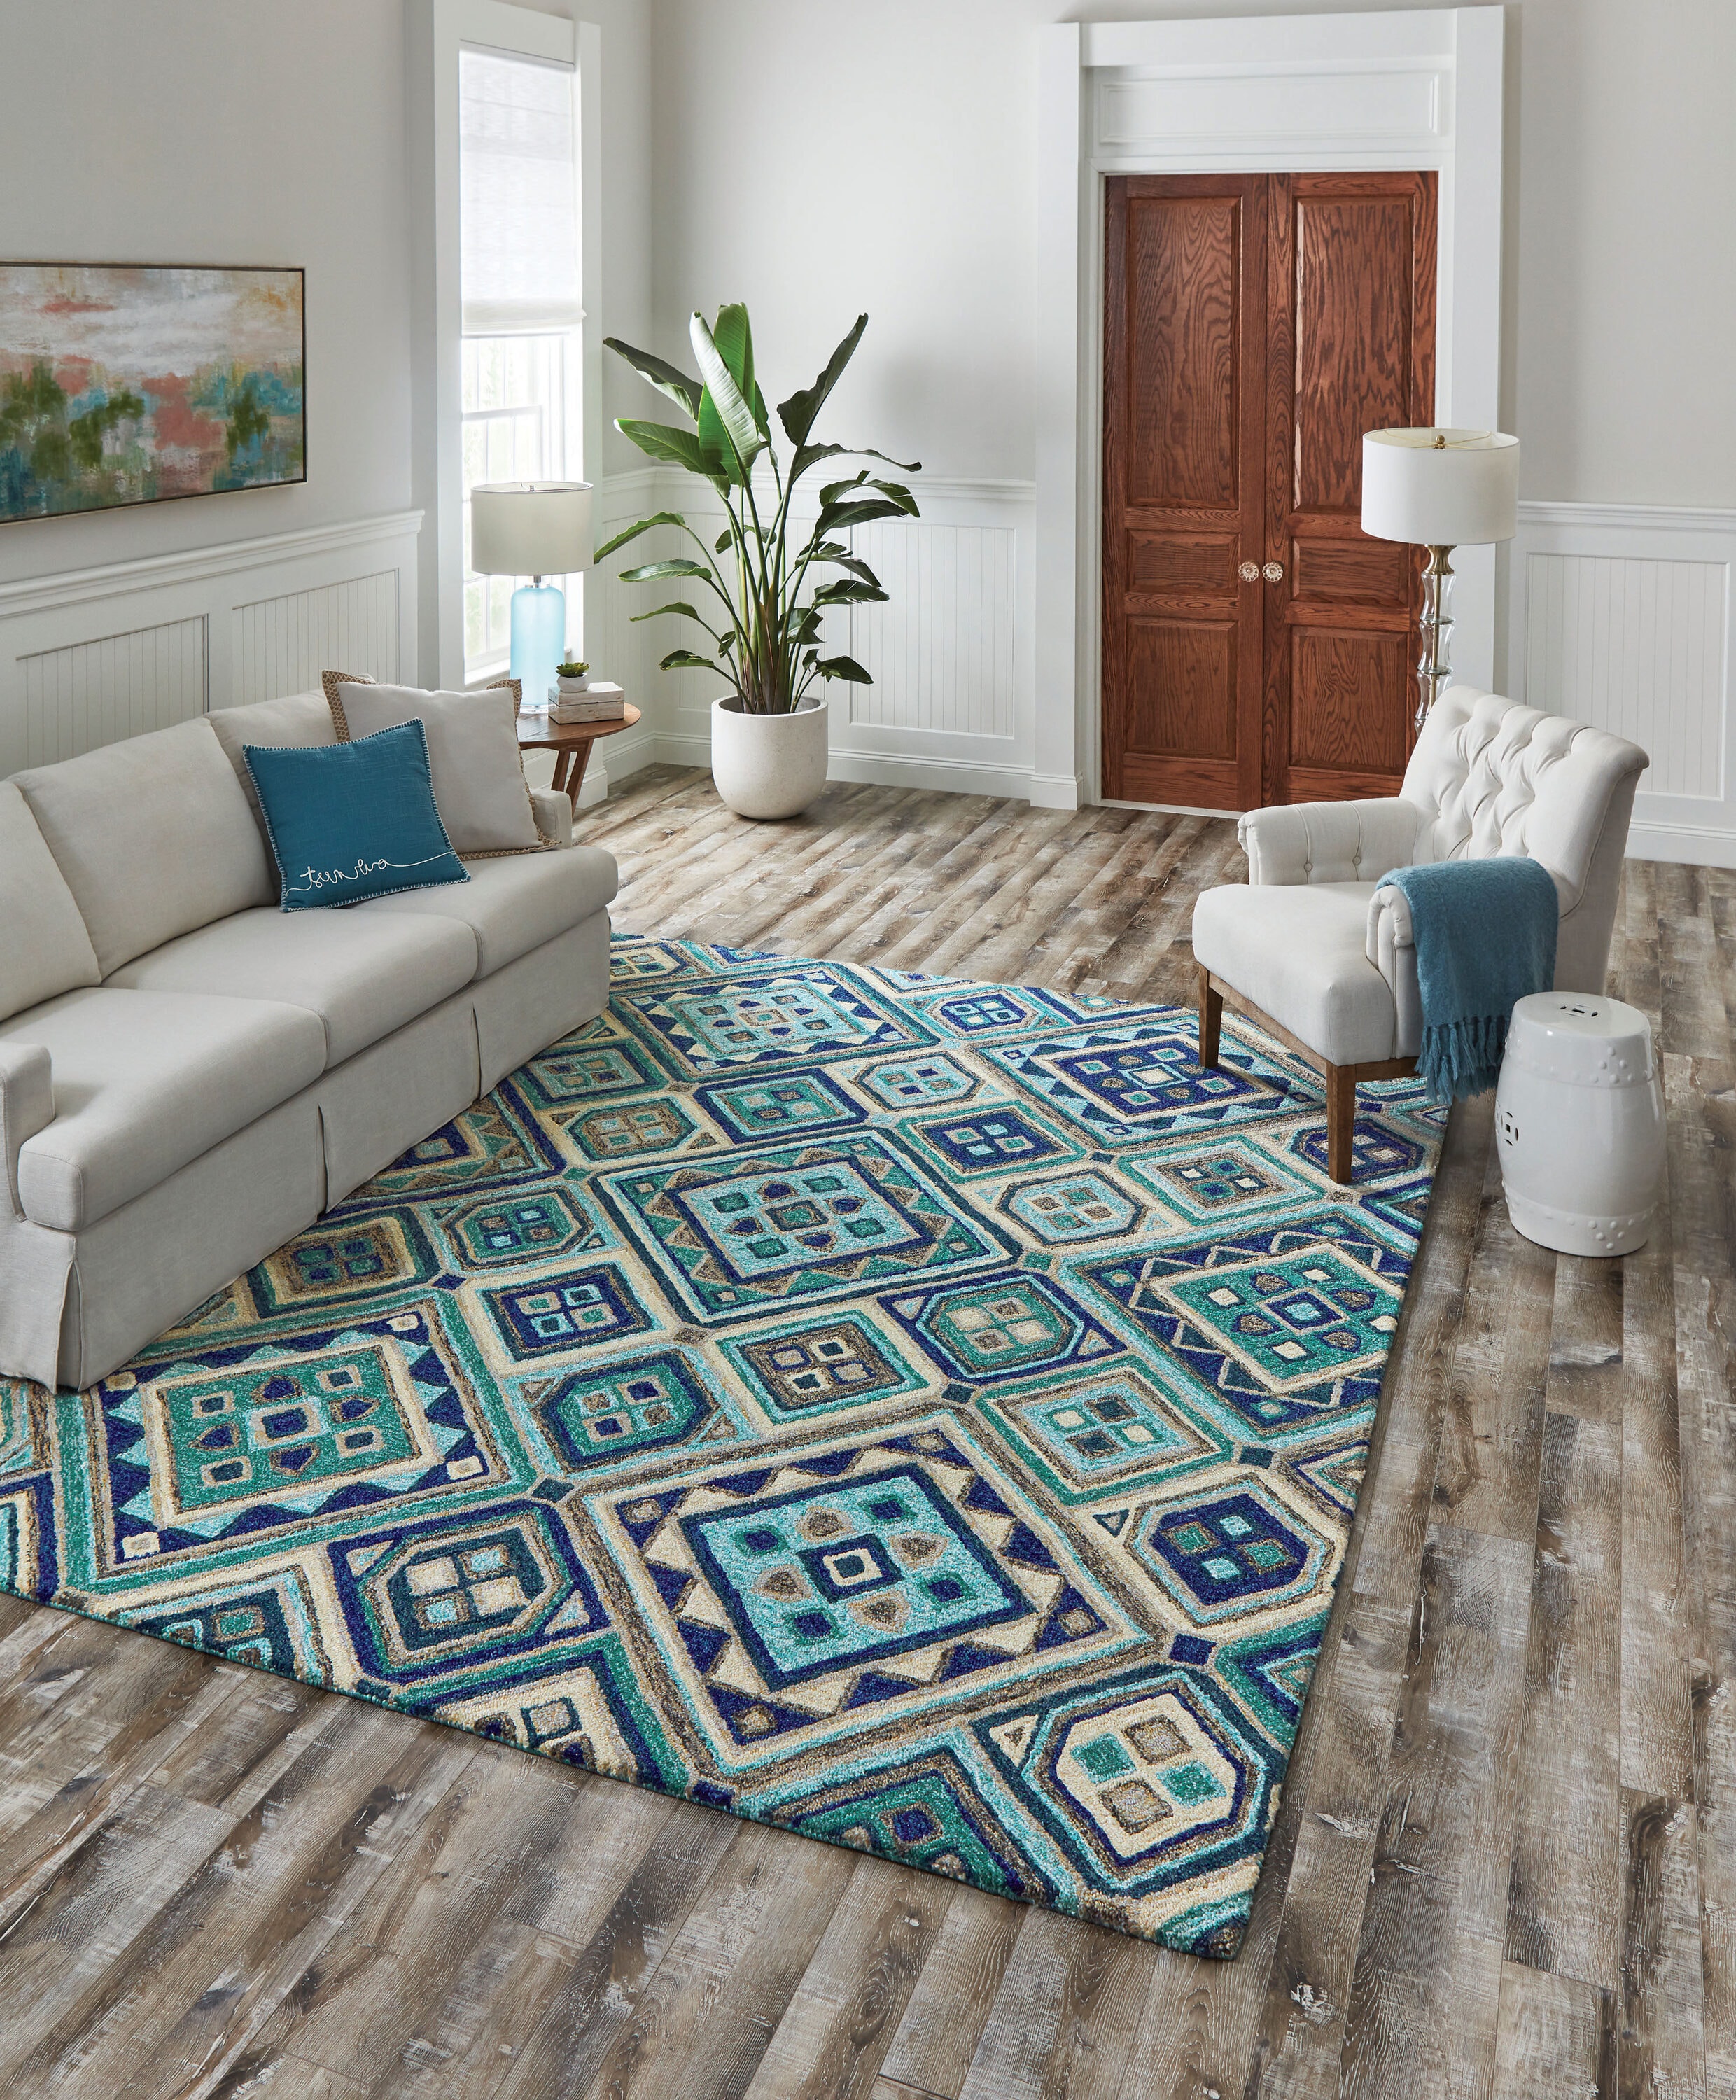 Teal Tiles 5 x 8 Teal Indoor/Outdoor Geometric Area Rug in Blue | - allen + roth with STAINMASTER 26735